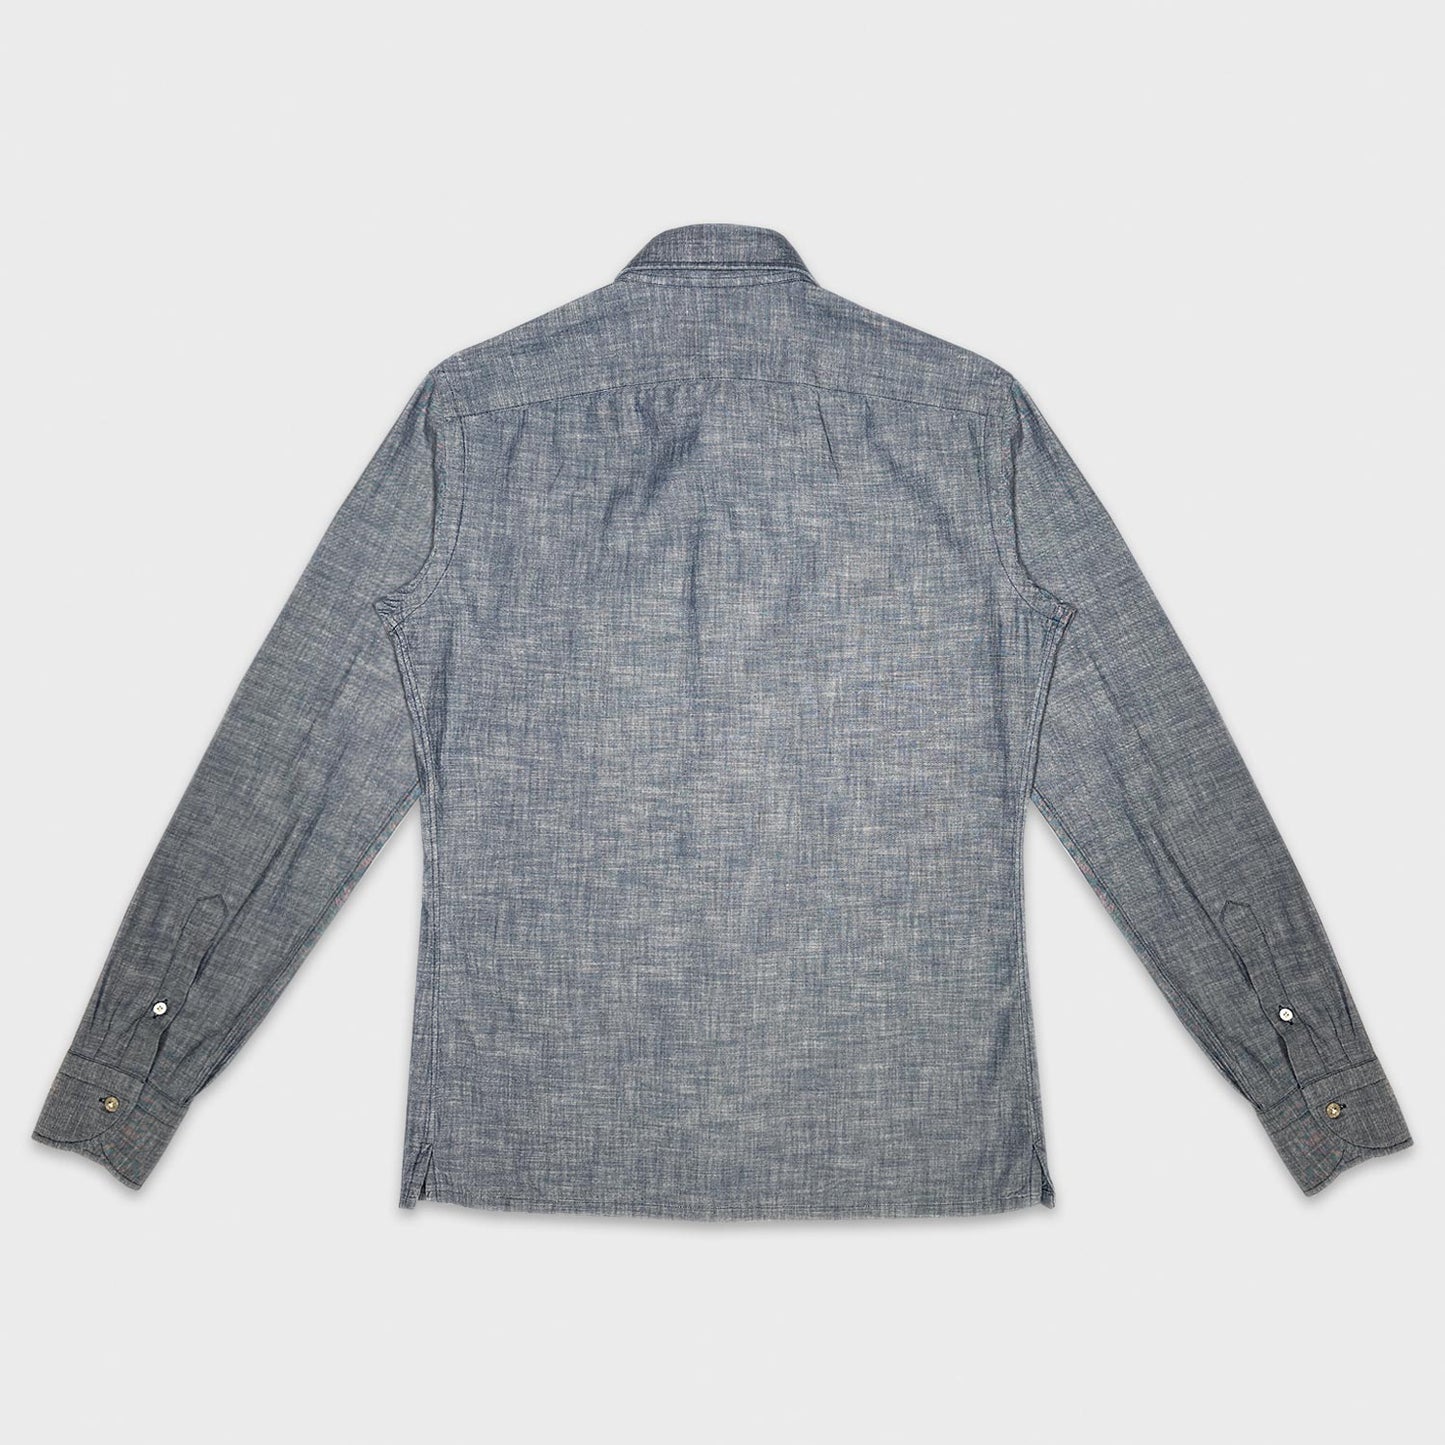 Men's safari shirt handmade in Italy by Borriello Napoli. The model of this sporty shirt is originally designed for safari trips, it has always been appreciated for its comfort with four pockets in the front, always trendy in this flamed indigo navy color.